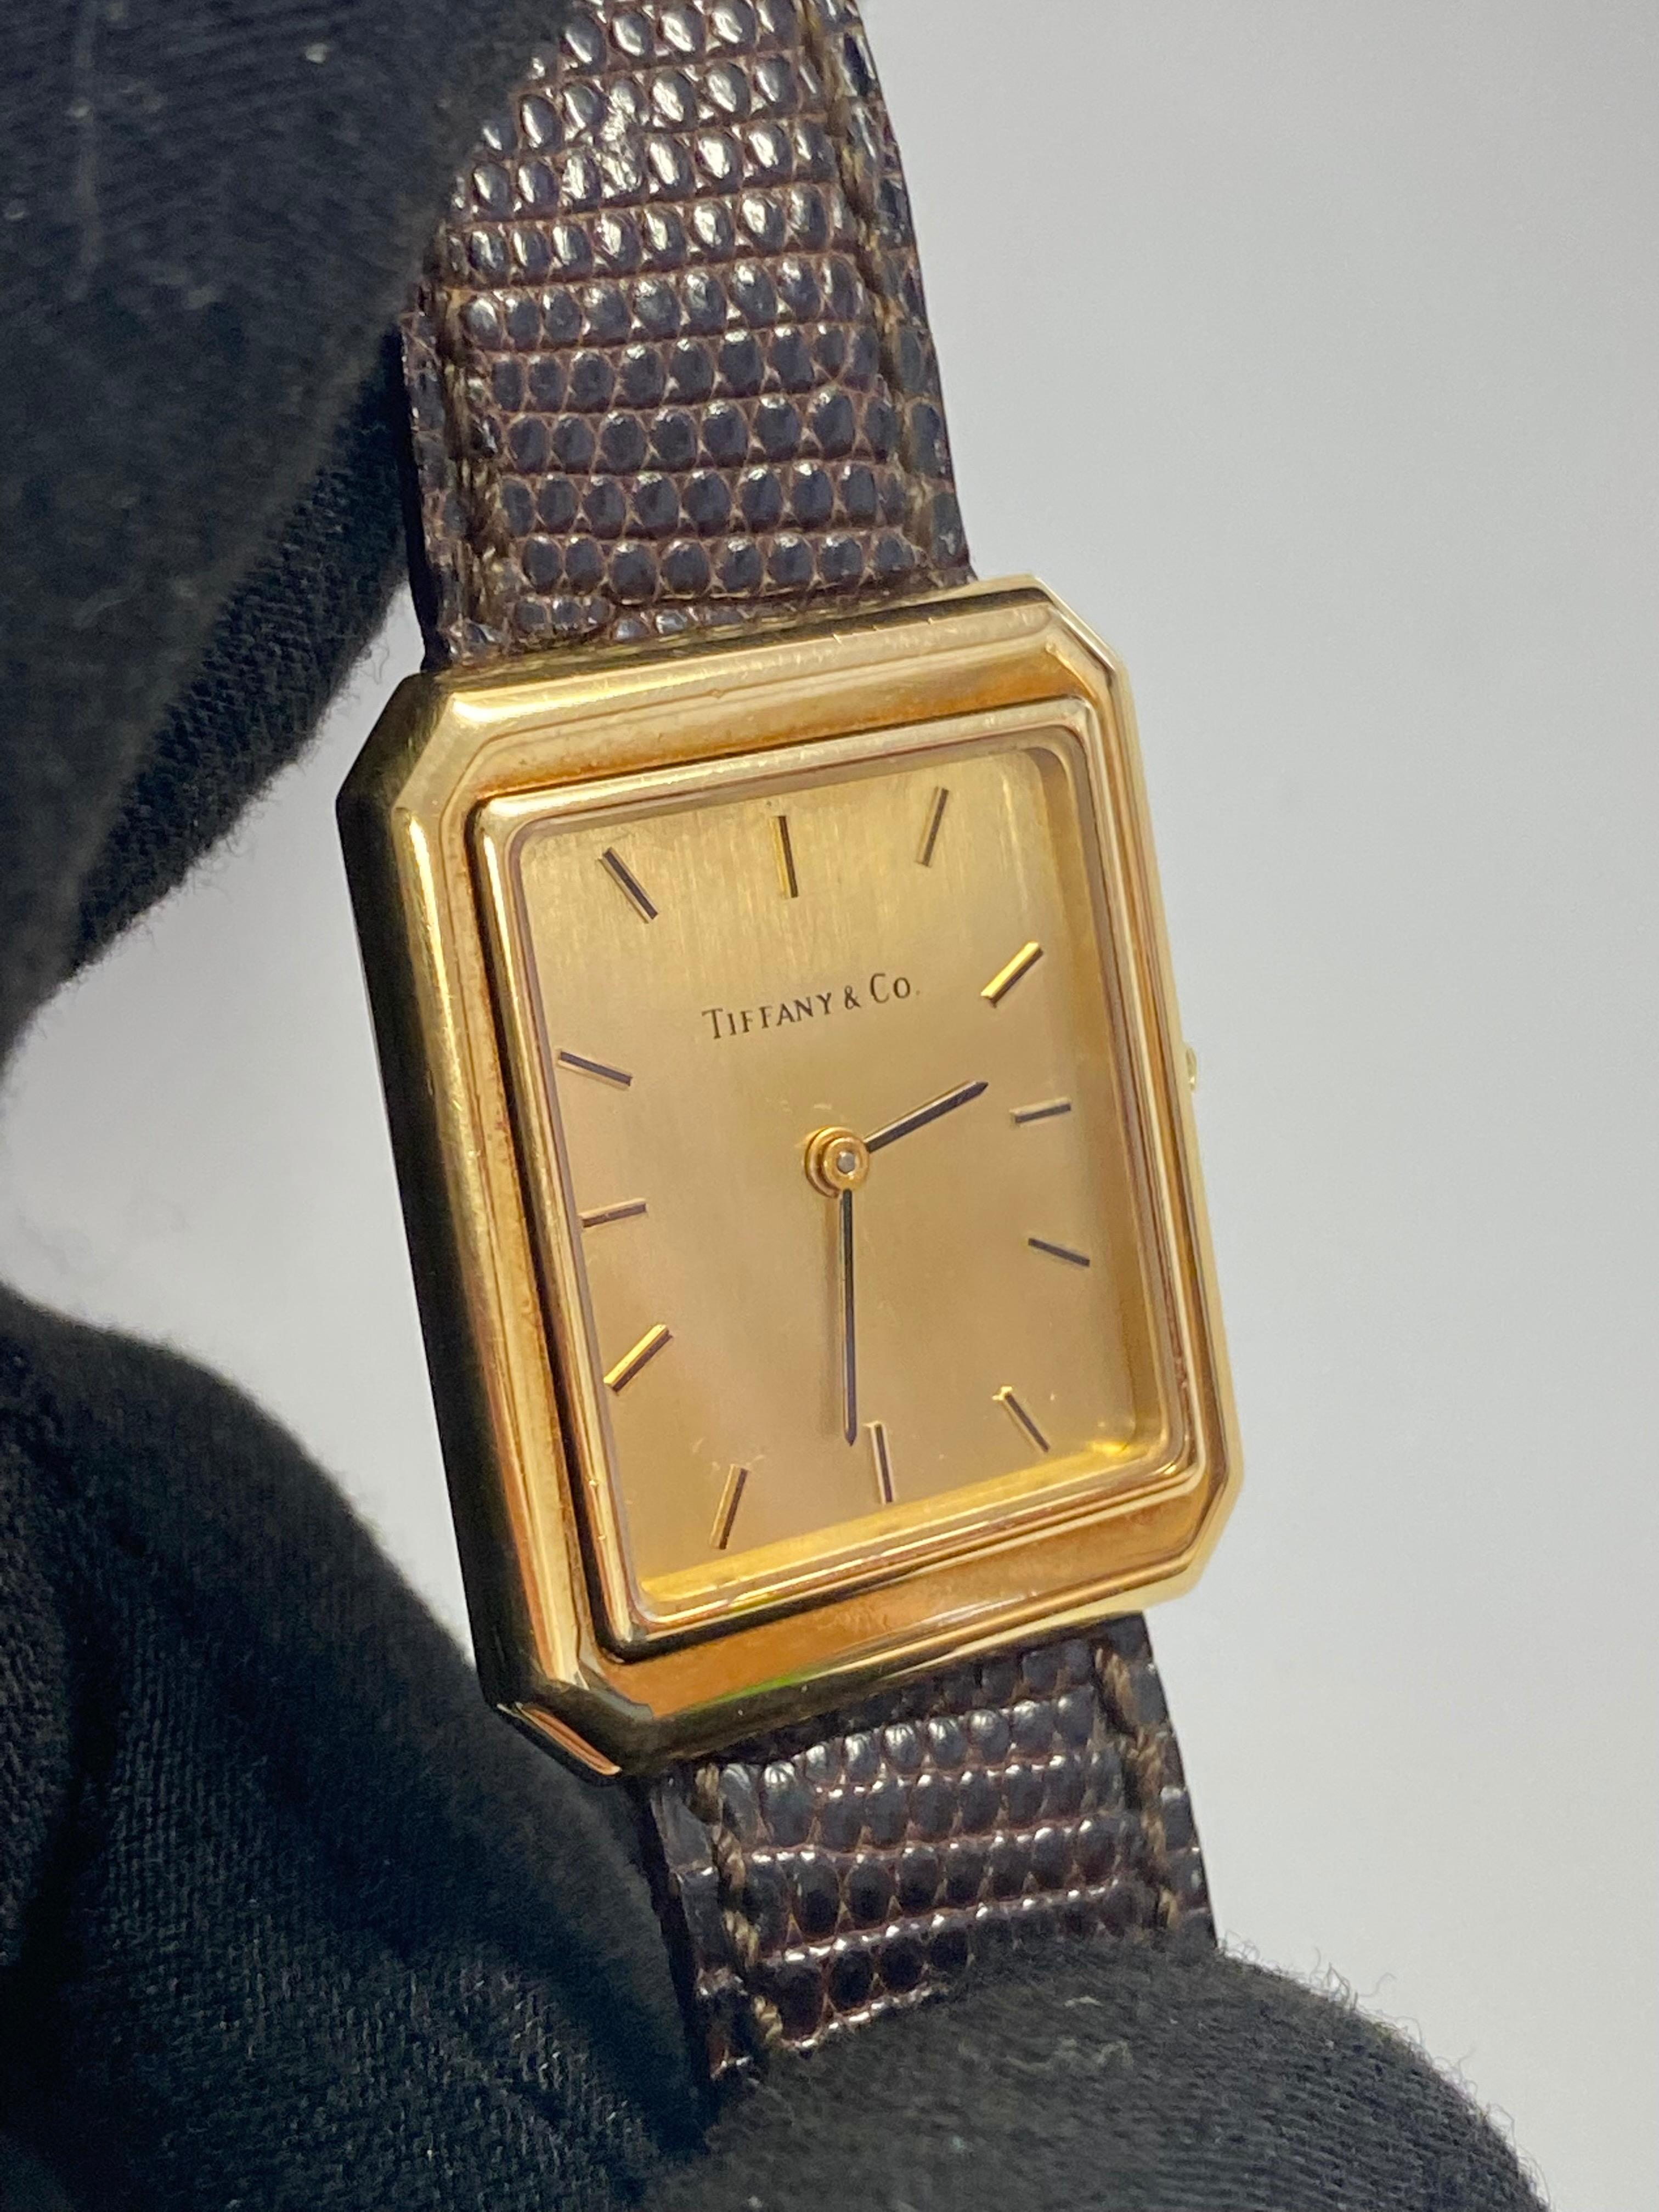 Unisex Tiffany & Co. Rectangular 18k Gold Watch with Original Leather Strap For Sale 3